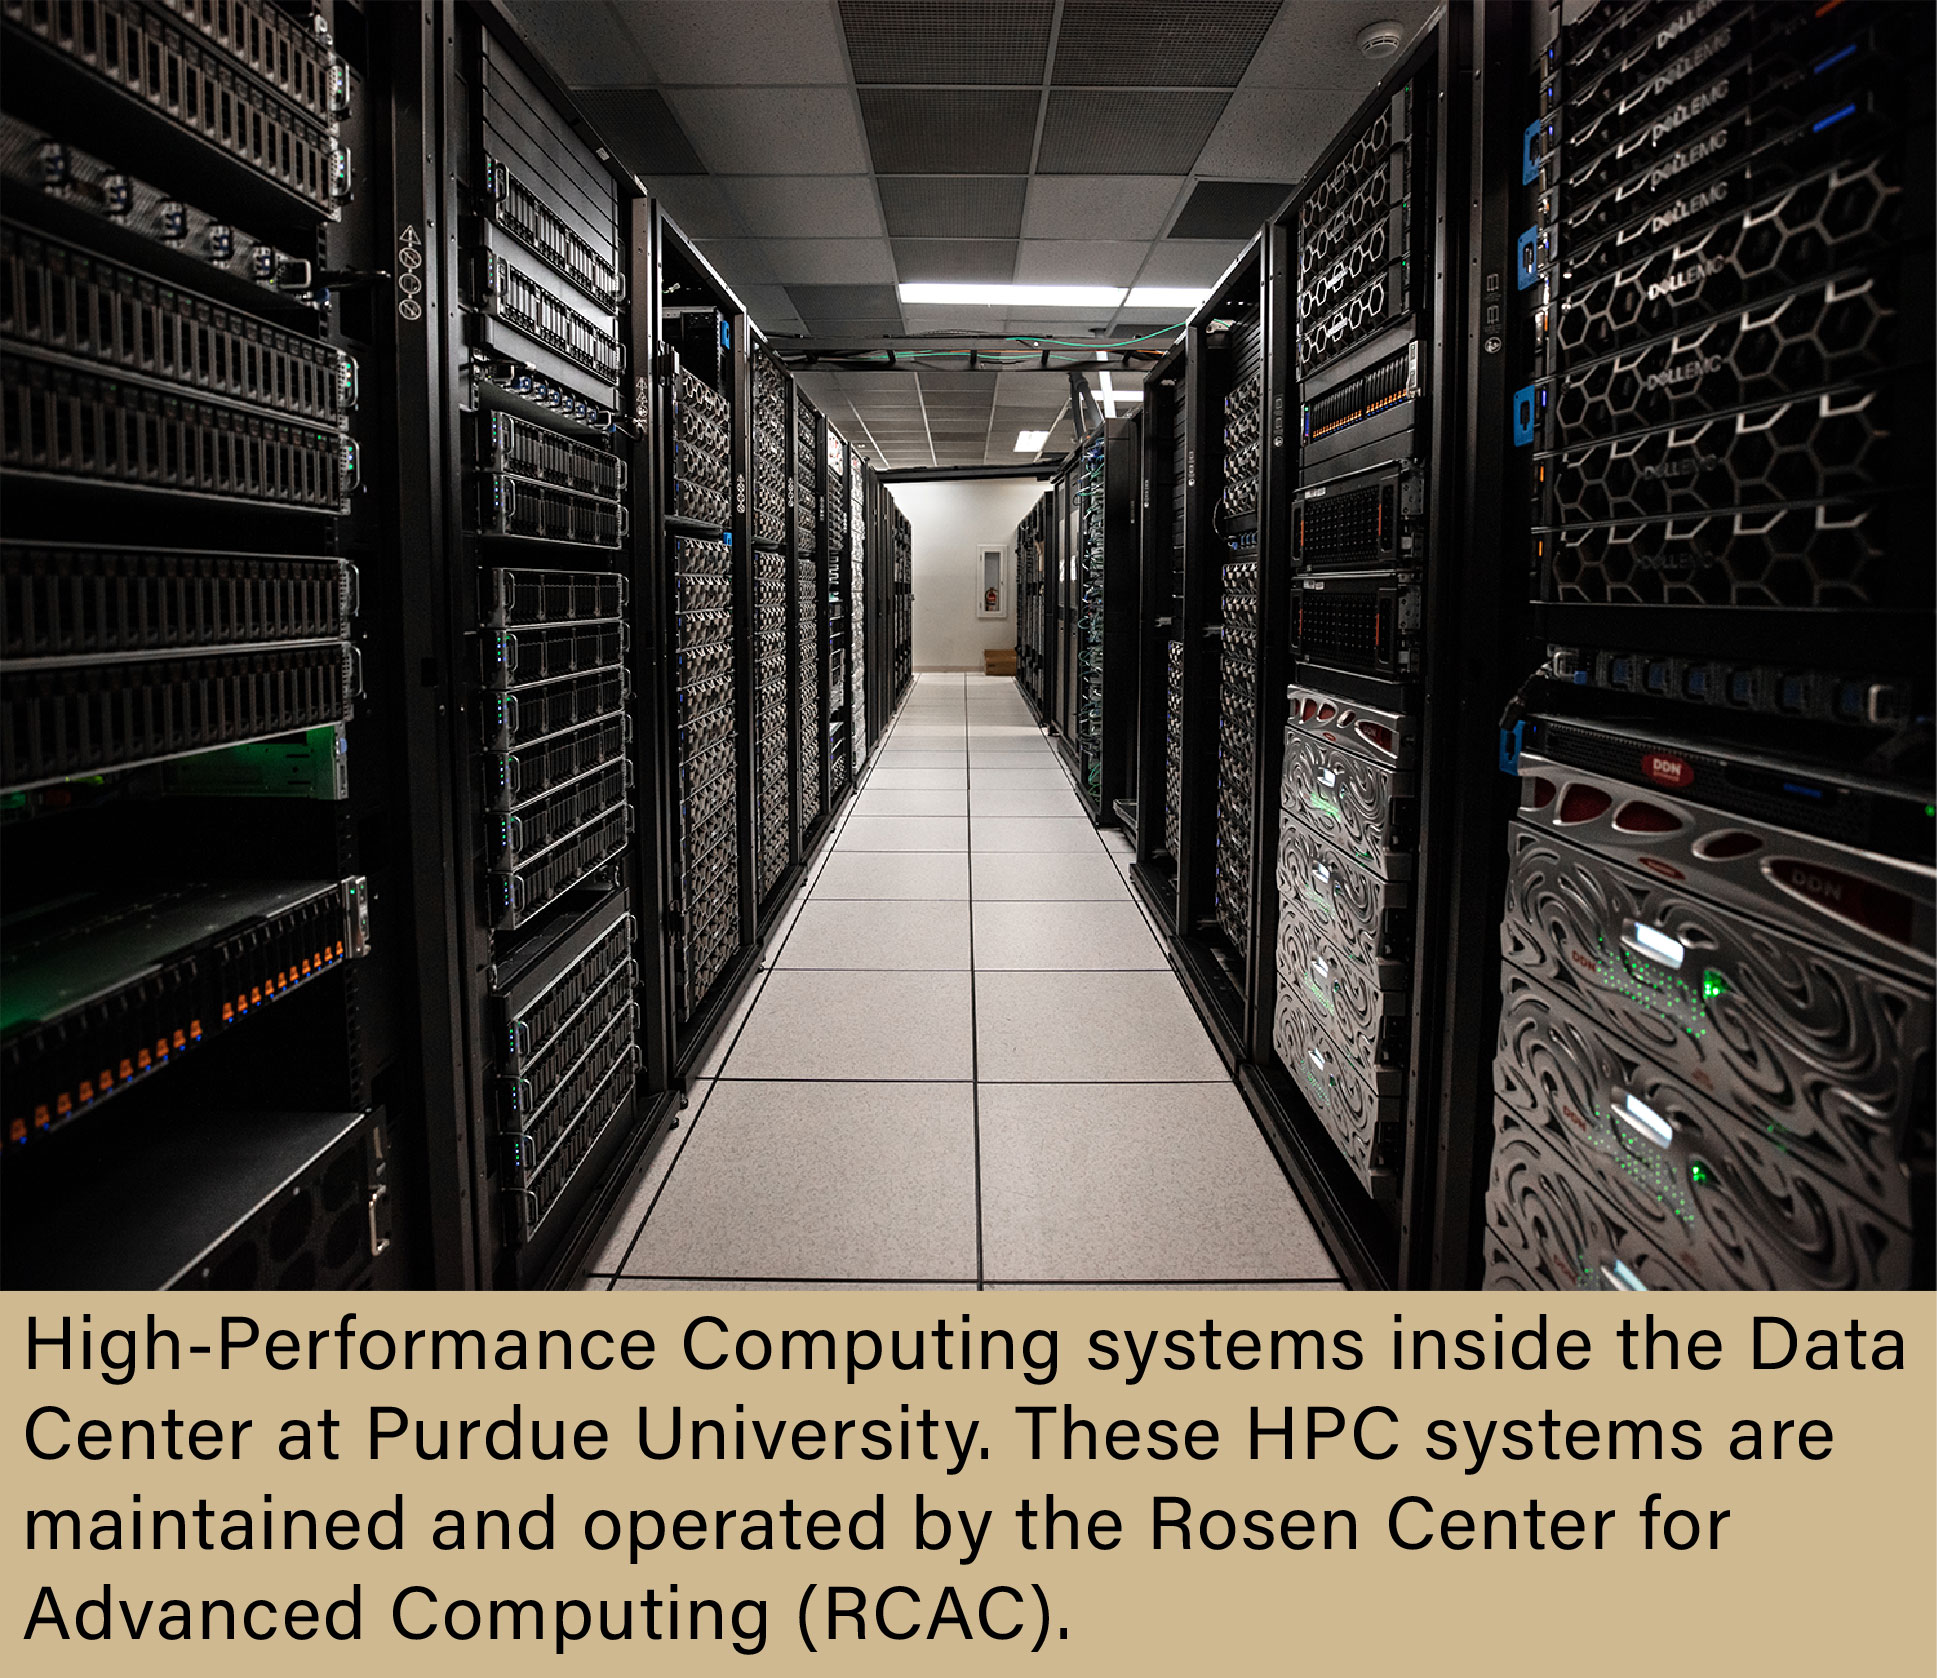 HPC systems inside the Data Center at Purdue University